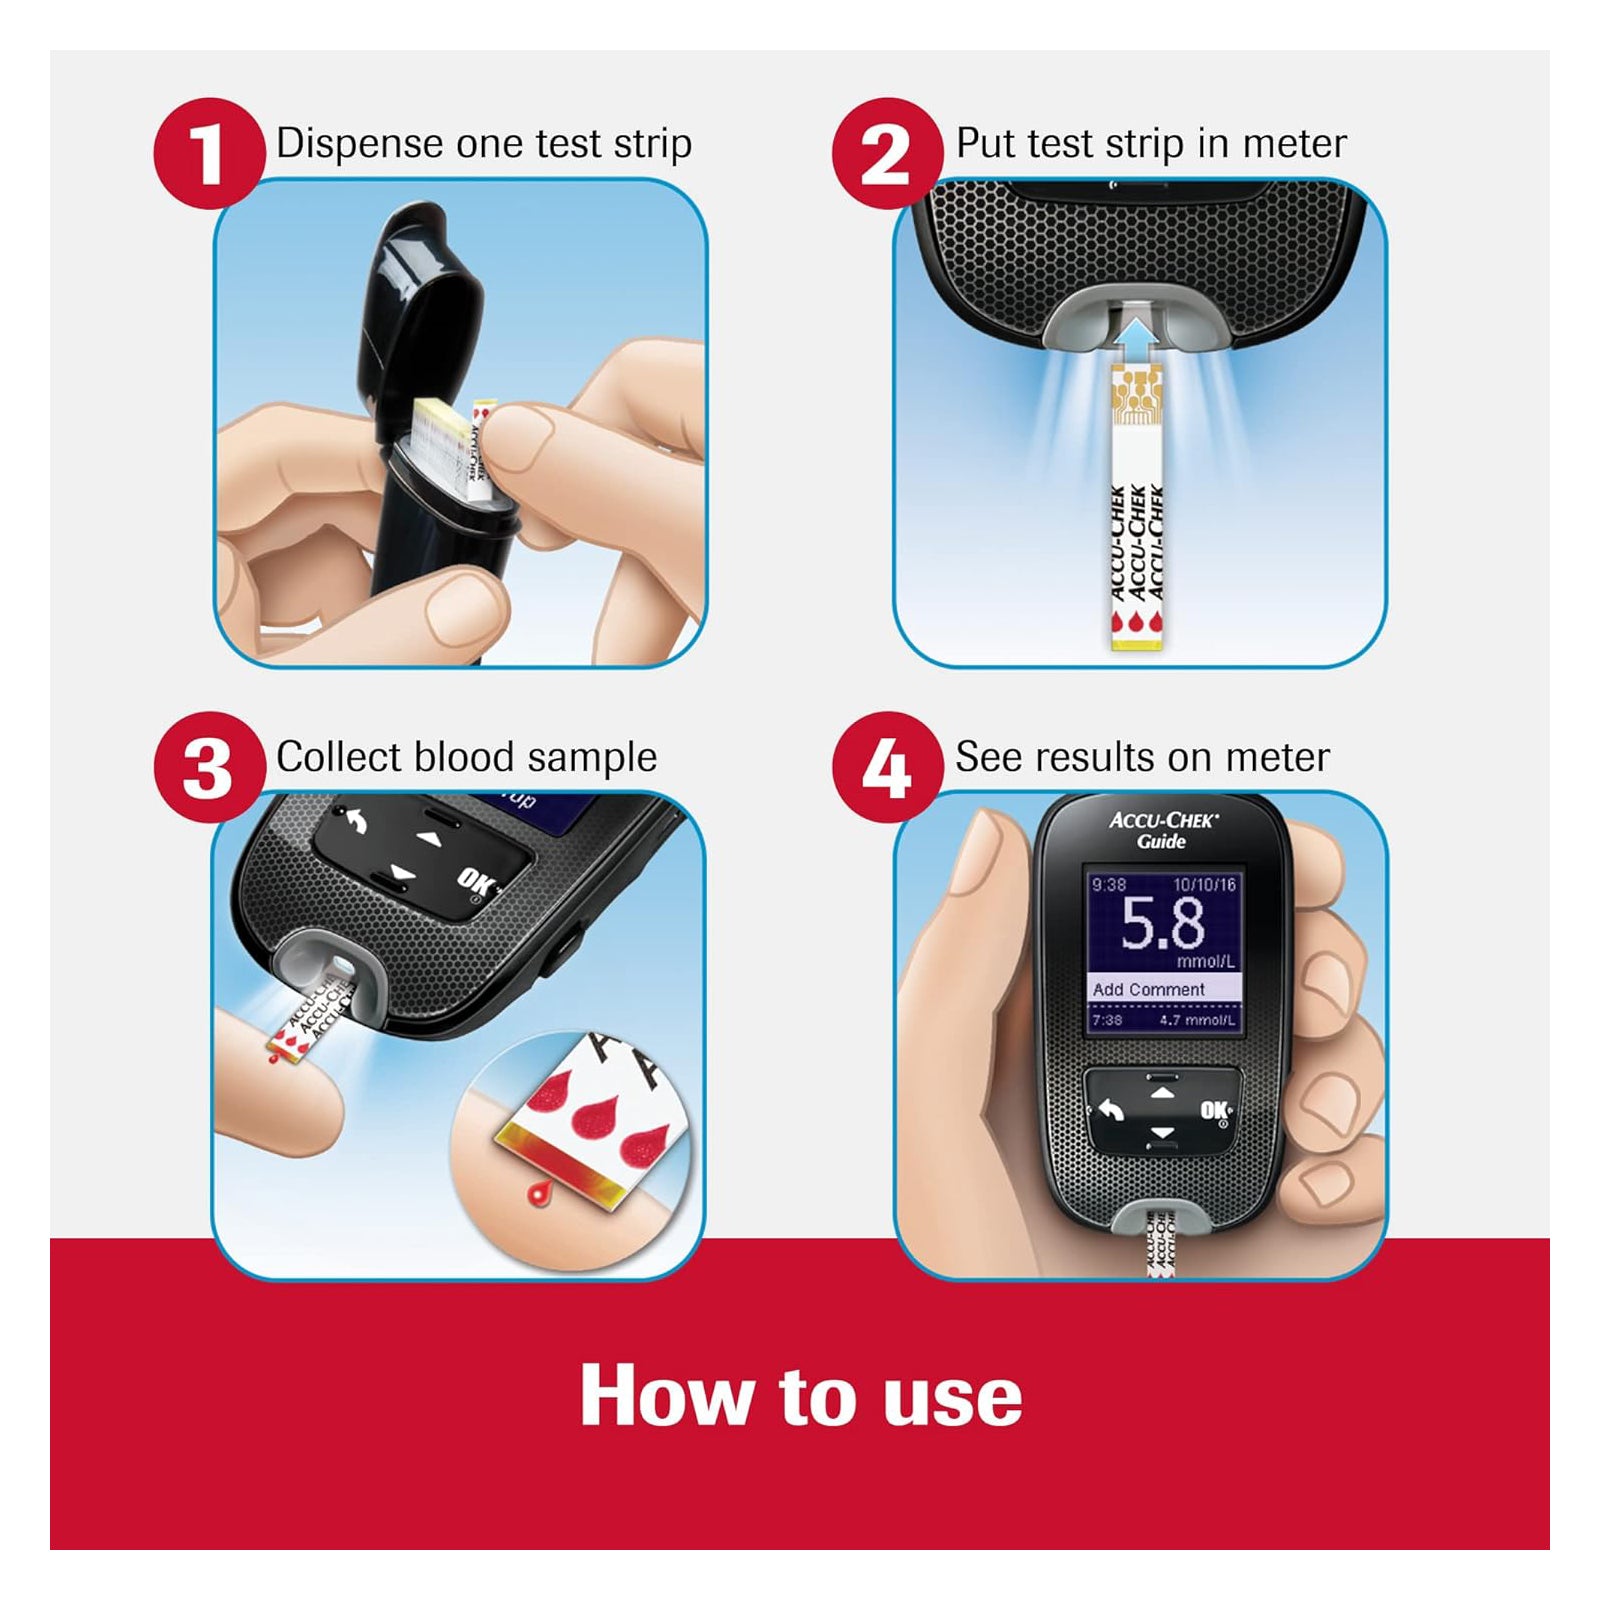 Accu-Chek Guide Diabetes Meter for Diabetic Blood Glucose Monitoring (Meter Only)